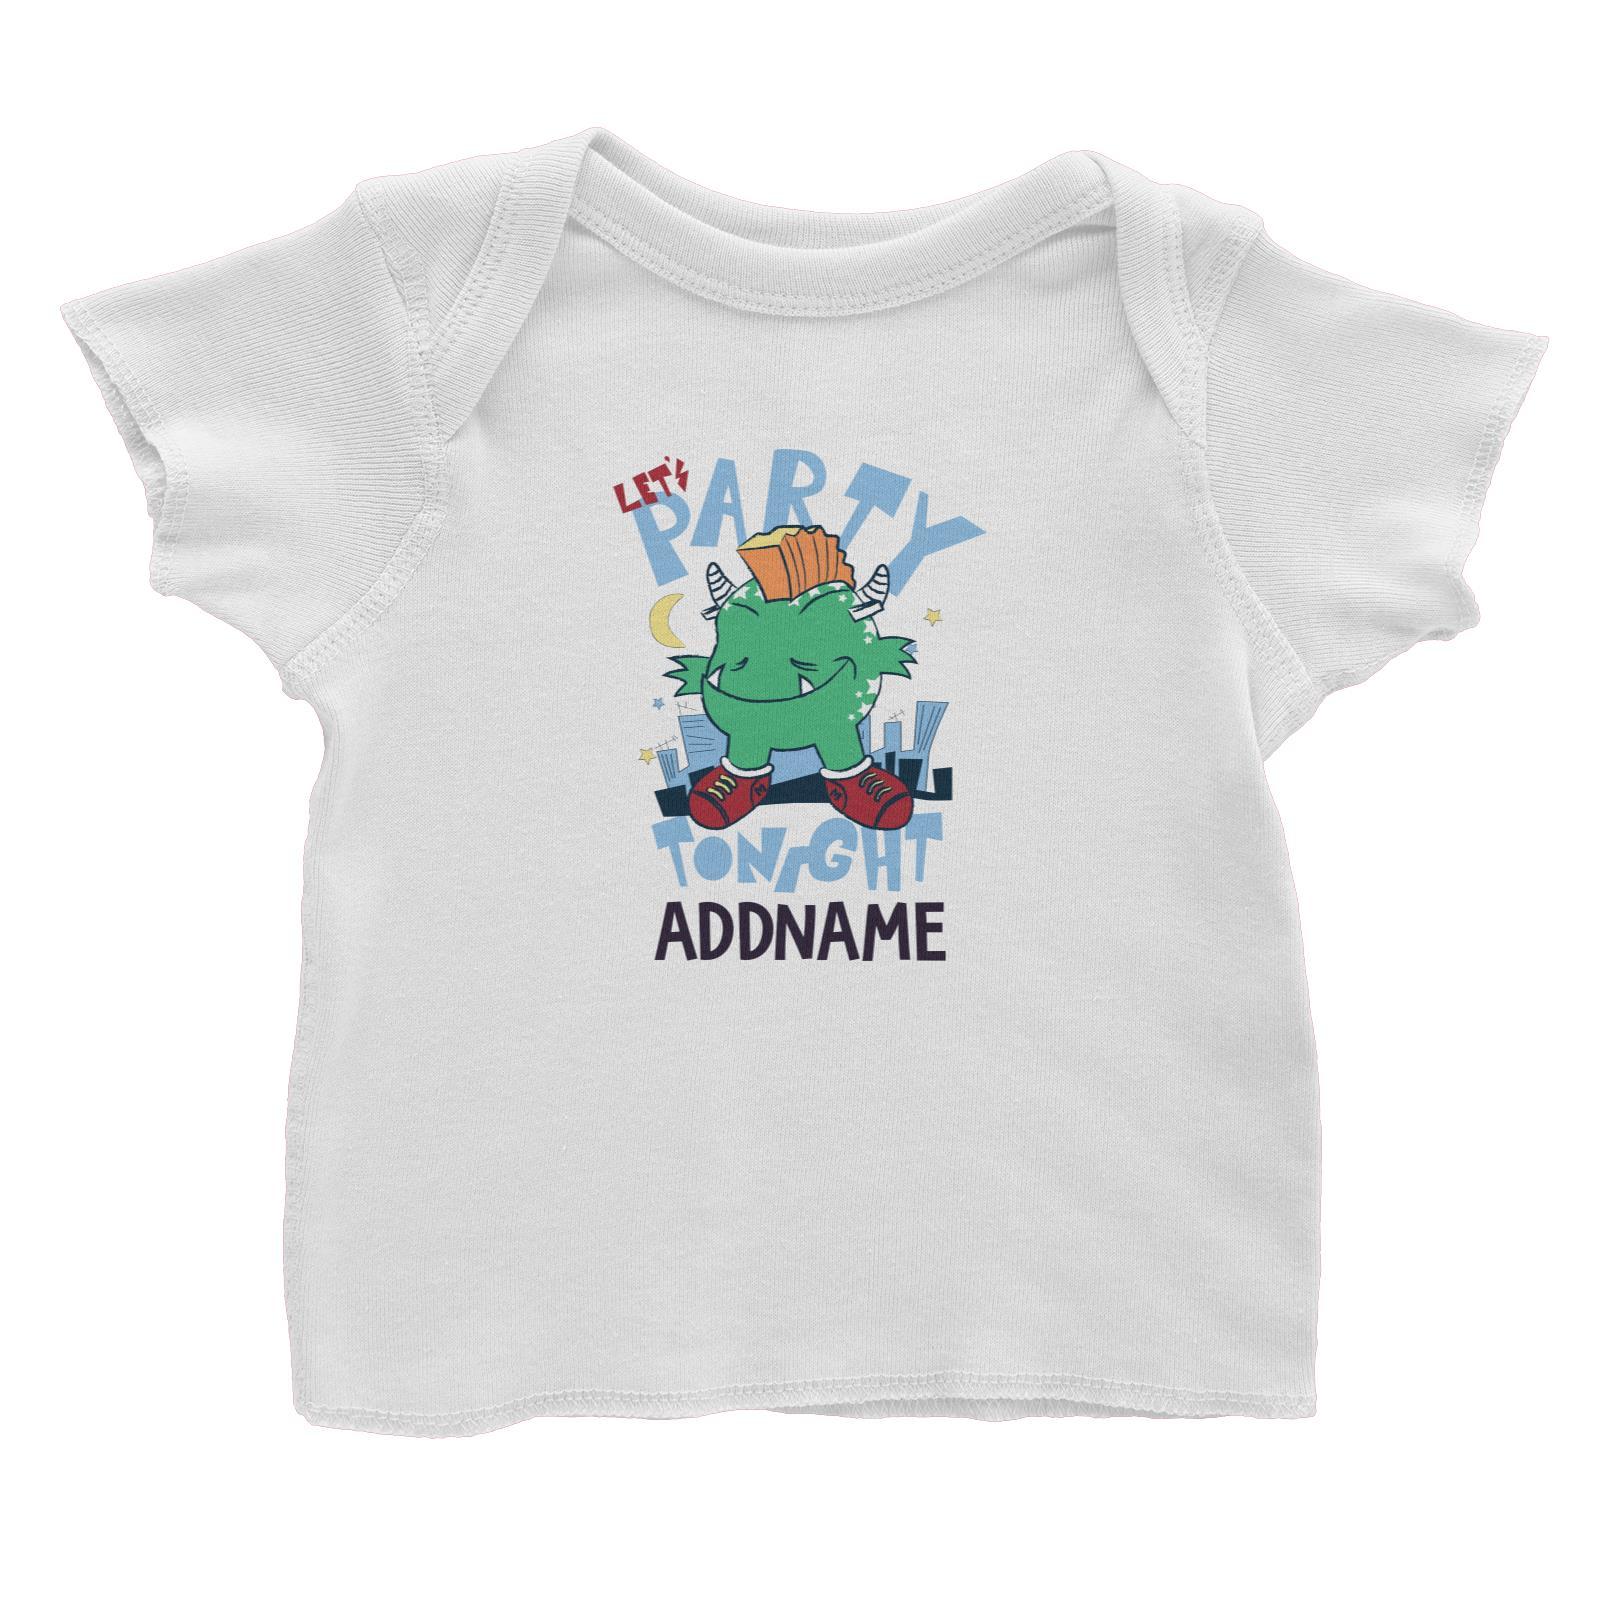 Cool Vibrant Series Let's Party Tonight MonsterAddname Baby T-Shirt